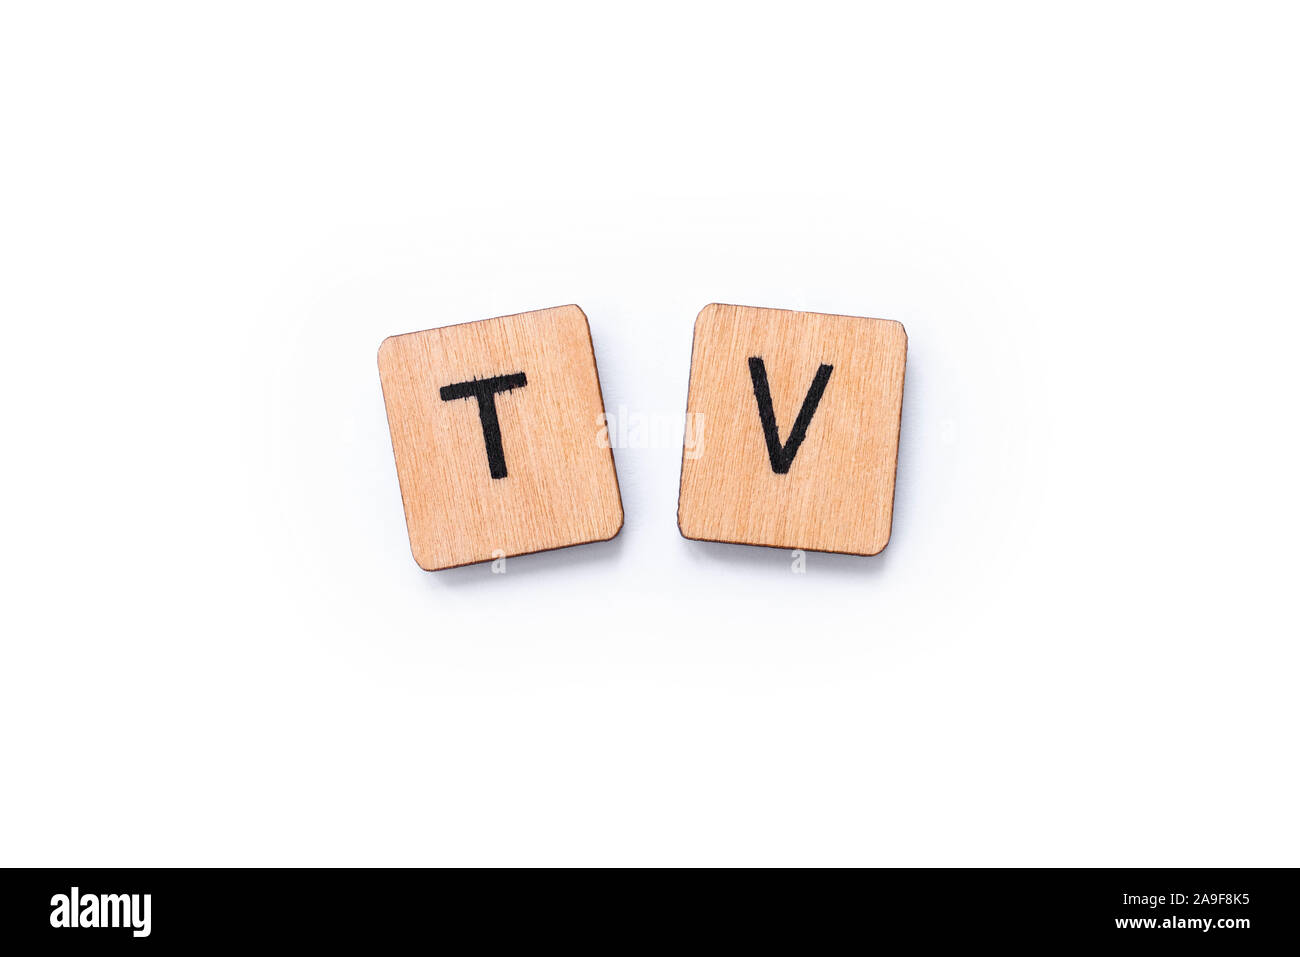 TV, the abbreviation for Television, spelt with wooden letter tiles over a  white background Stock Photo - Alamy